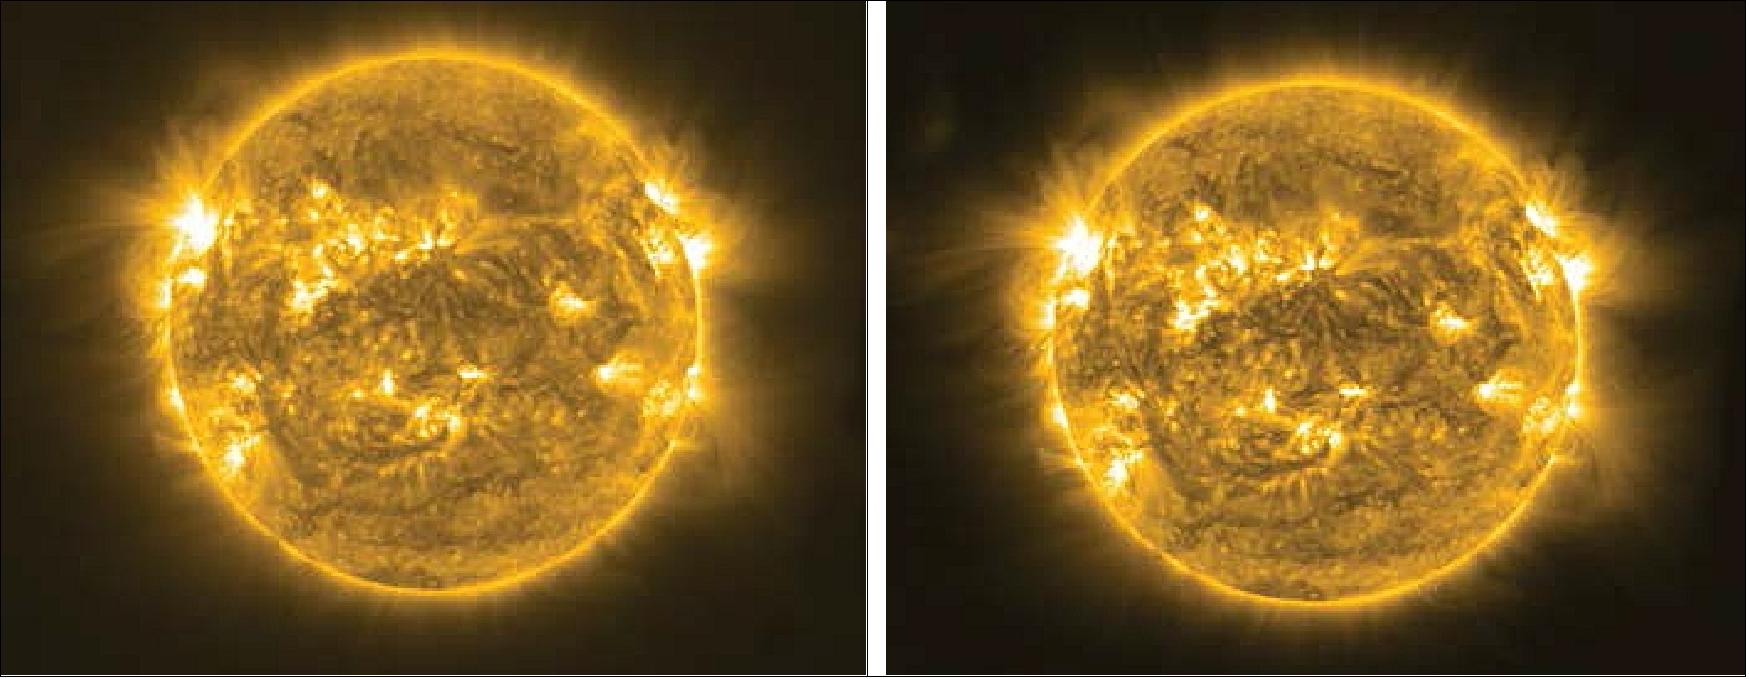 Figure 38: Left: a calibrated image from the PROBA-2 SWAP camera; right: the same image processed by the stray light correction algorithm by D. Seaton (Royal Obs. Belgium) and P. Shearer (Univ. Michigan) showing improved quality (image credit: ESA, Ref. 54)